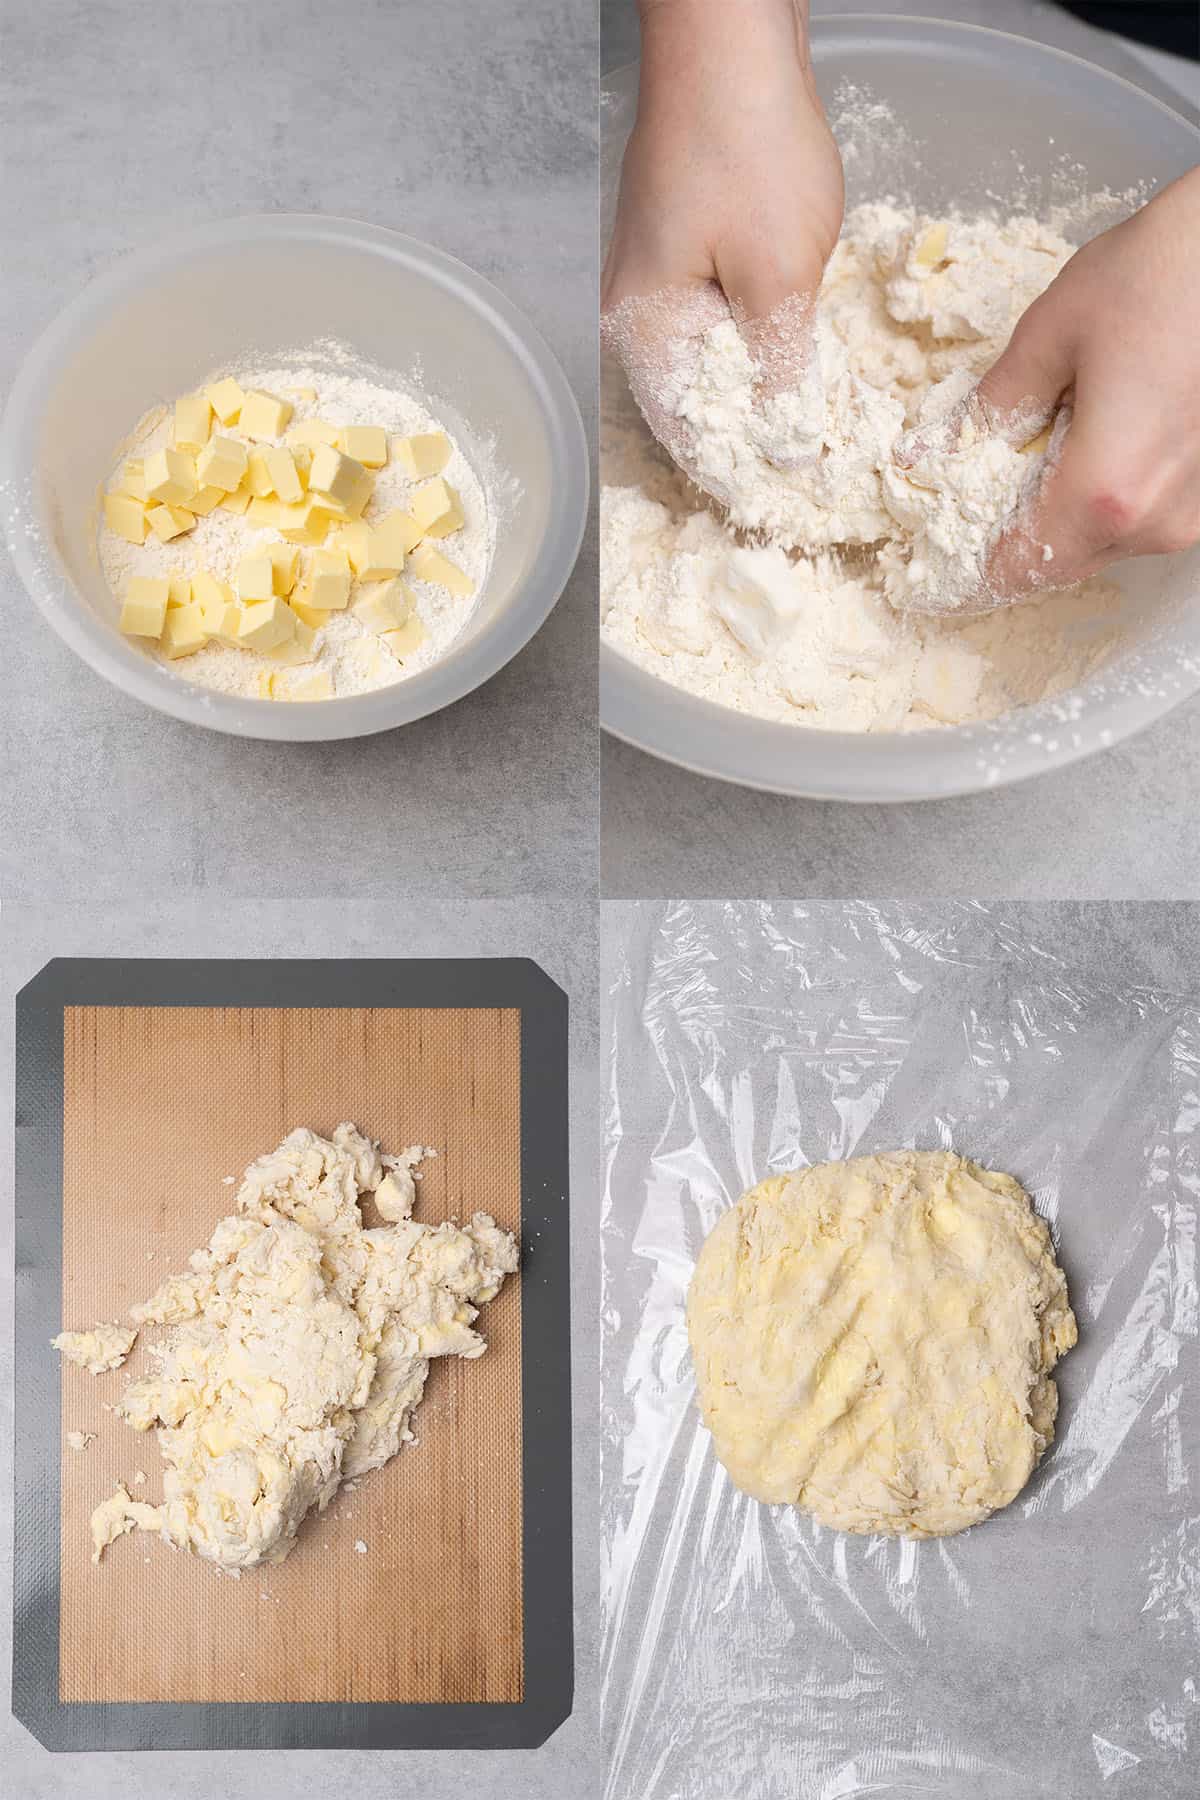 making Rough Puff pastry dough.